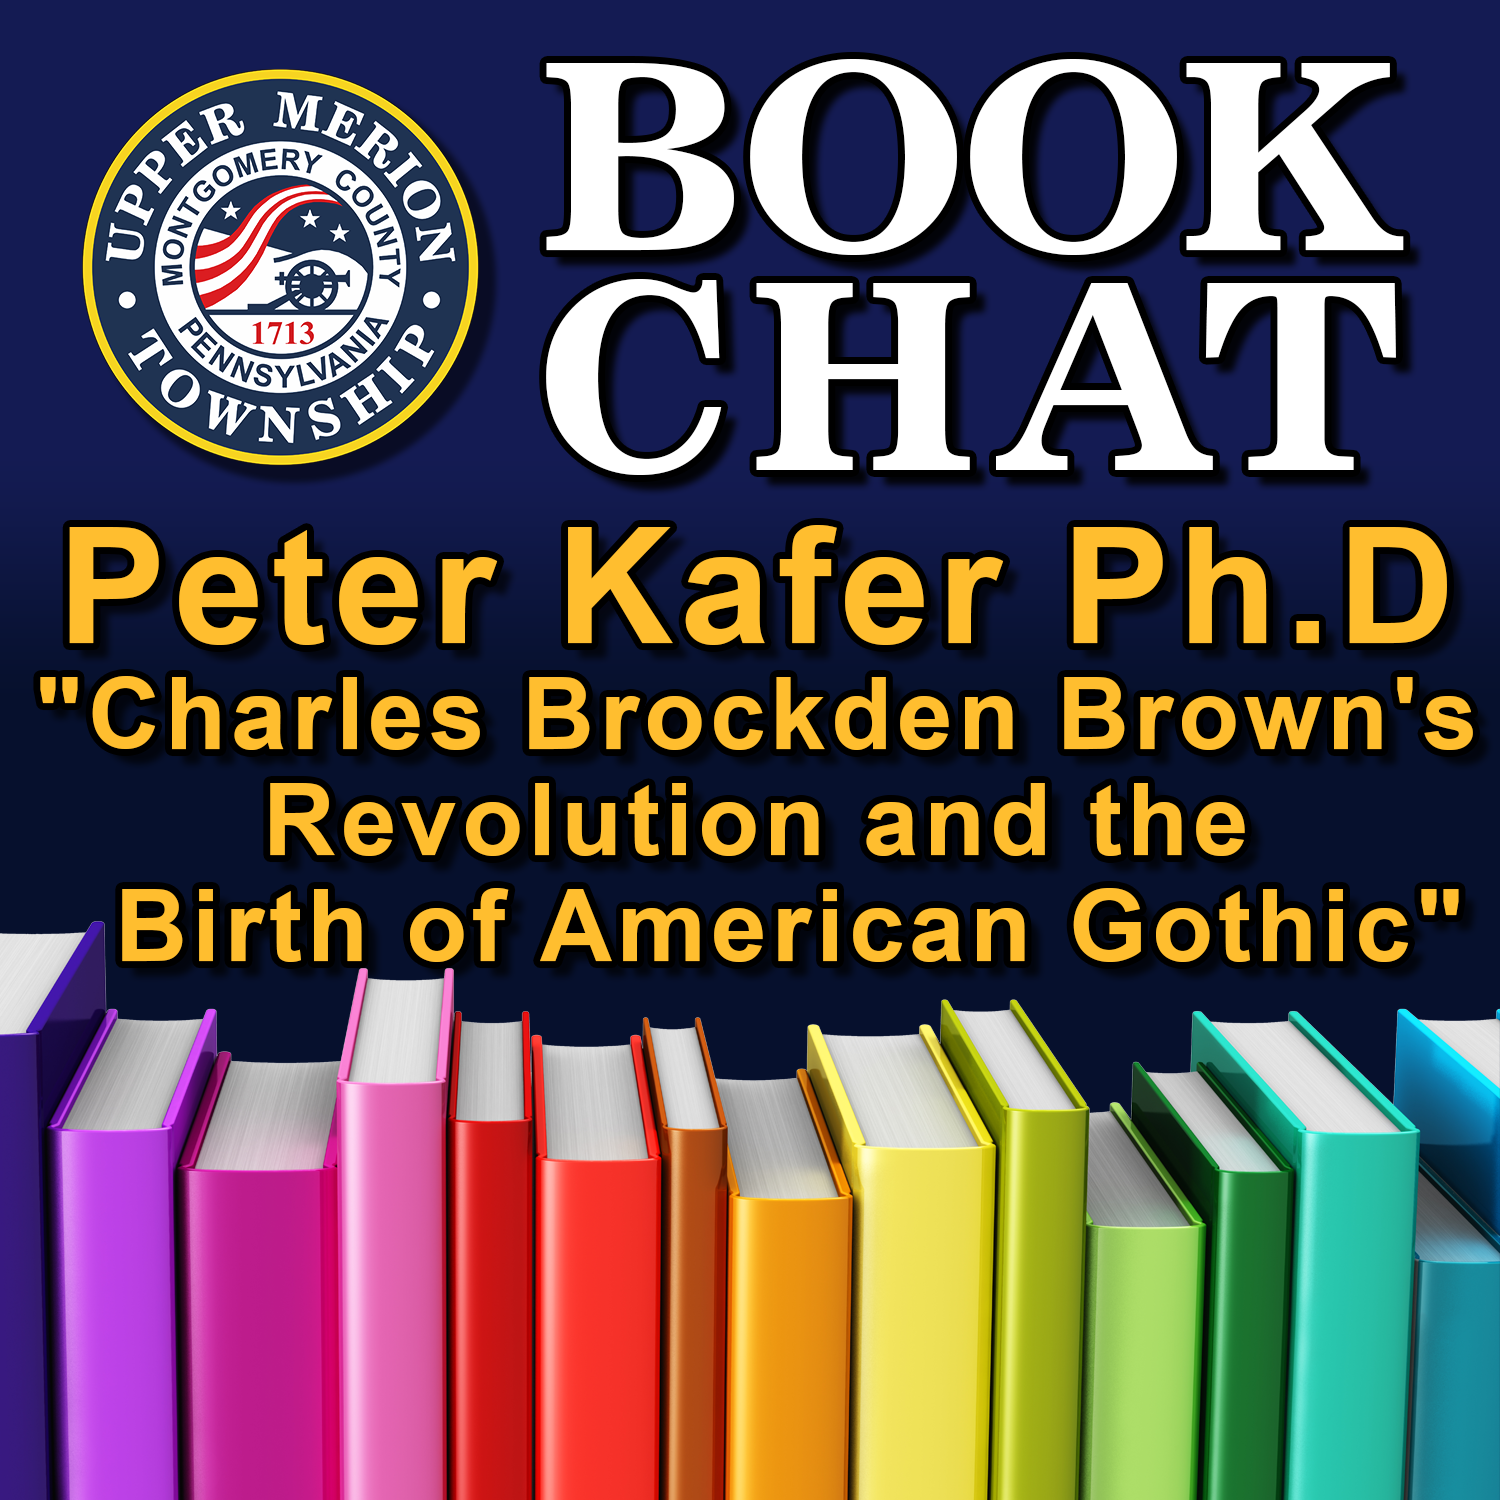 Peter Kafer Ph.D. - Charles Brockden Brown's Revolution and the Birth of American Gothic